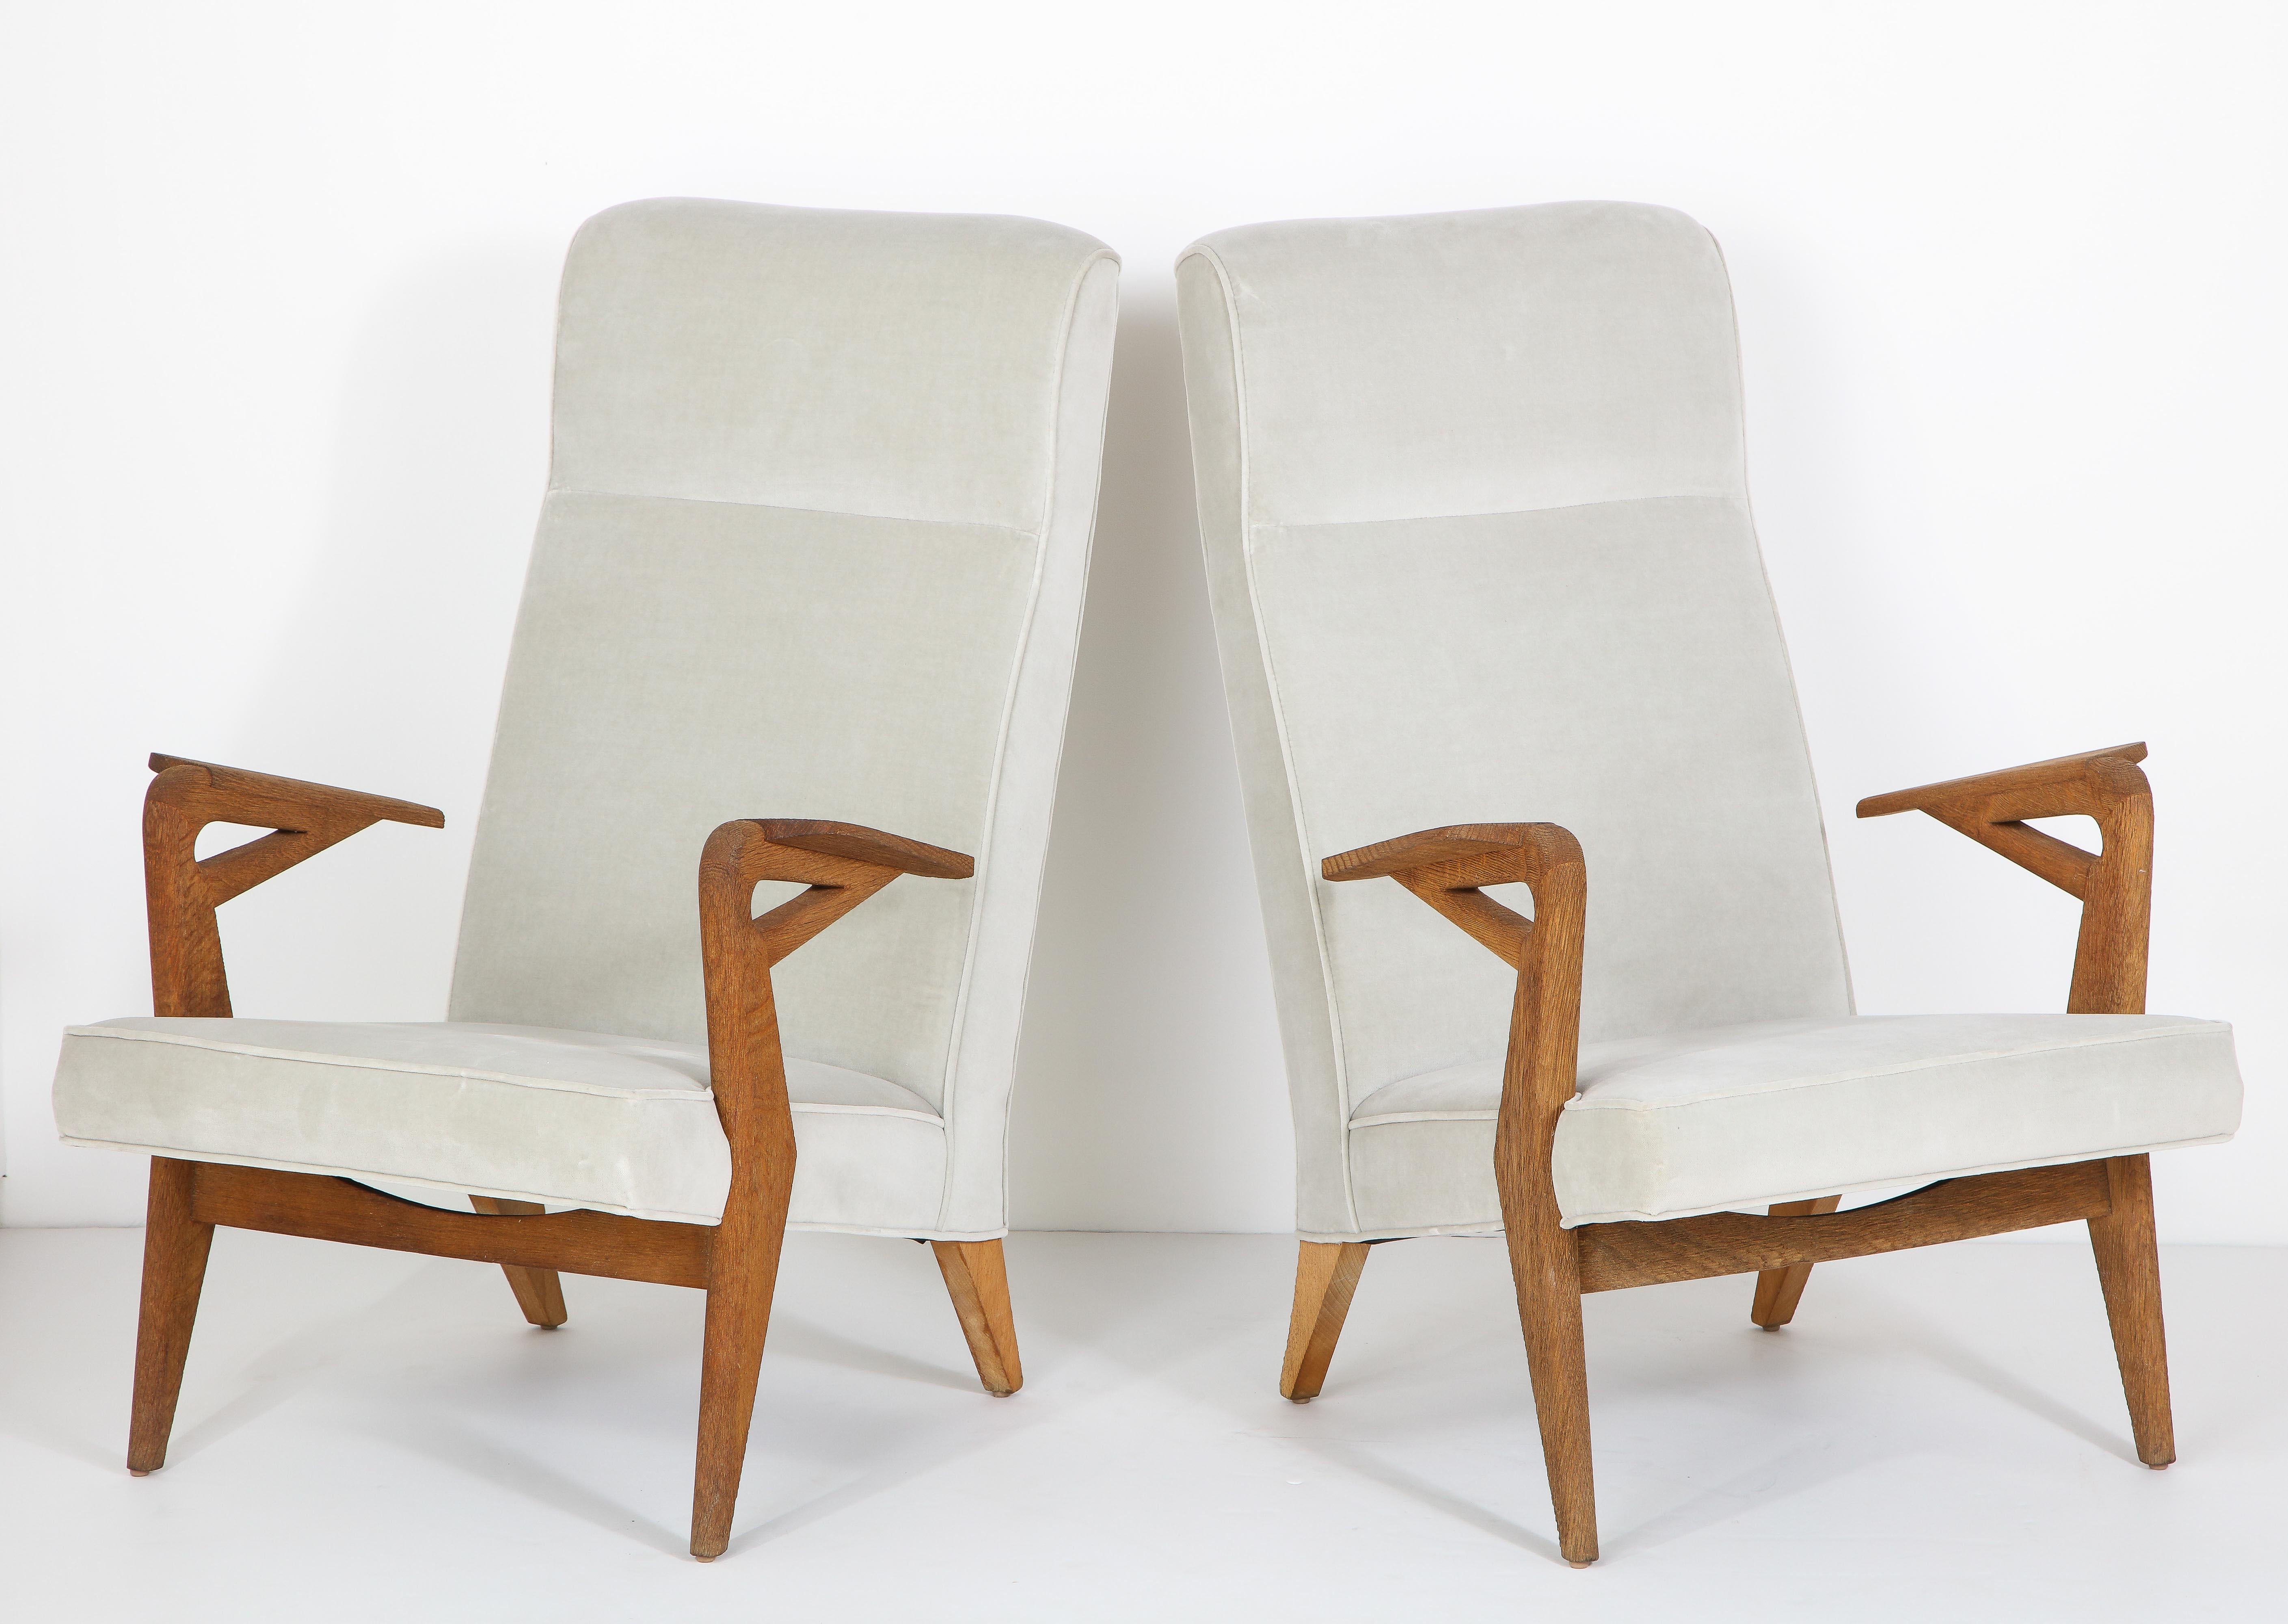 Parker-Knoll raw oak armchairs freshly reupholstered.